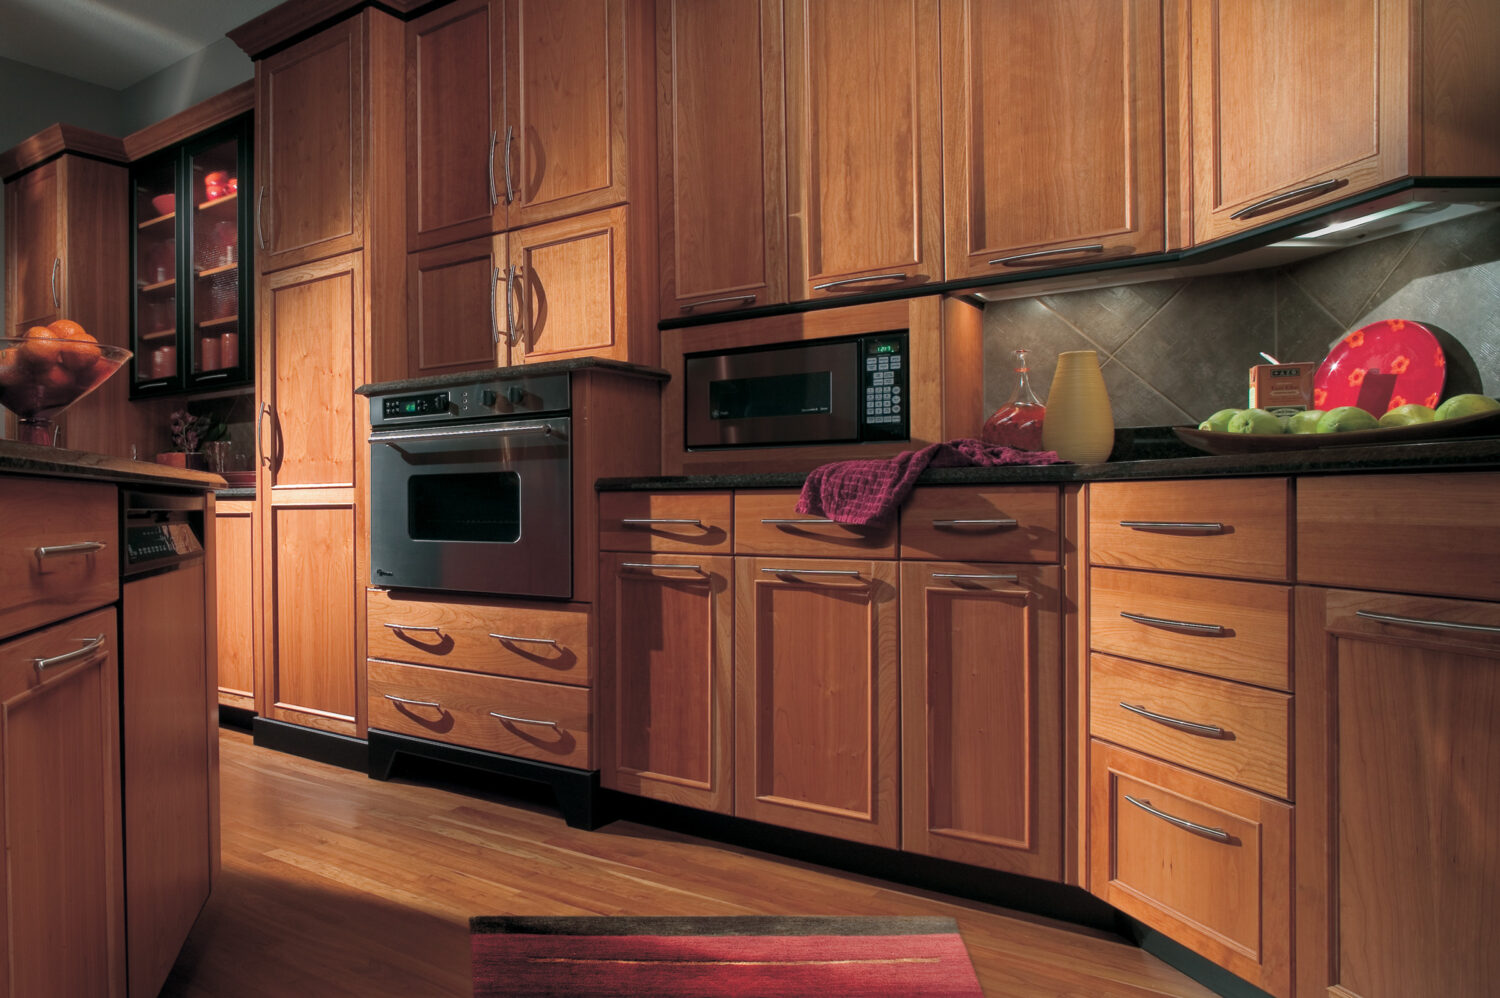 This practical and intelligent cherry wood kitchen design creates cabinetry that performs as beautifully as it looks with a warm cozy color palette.